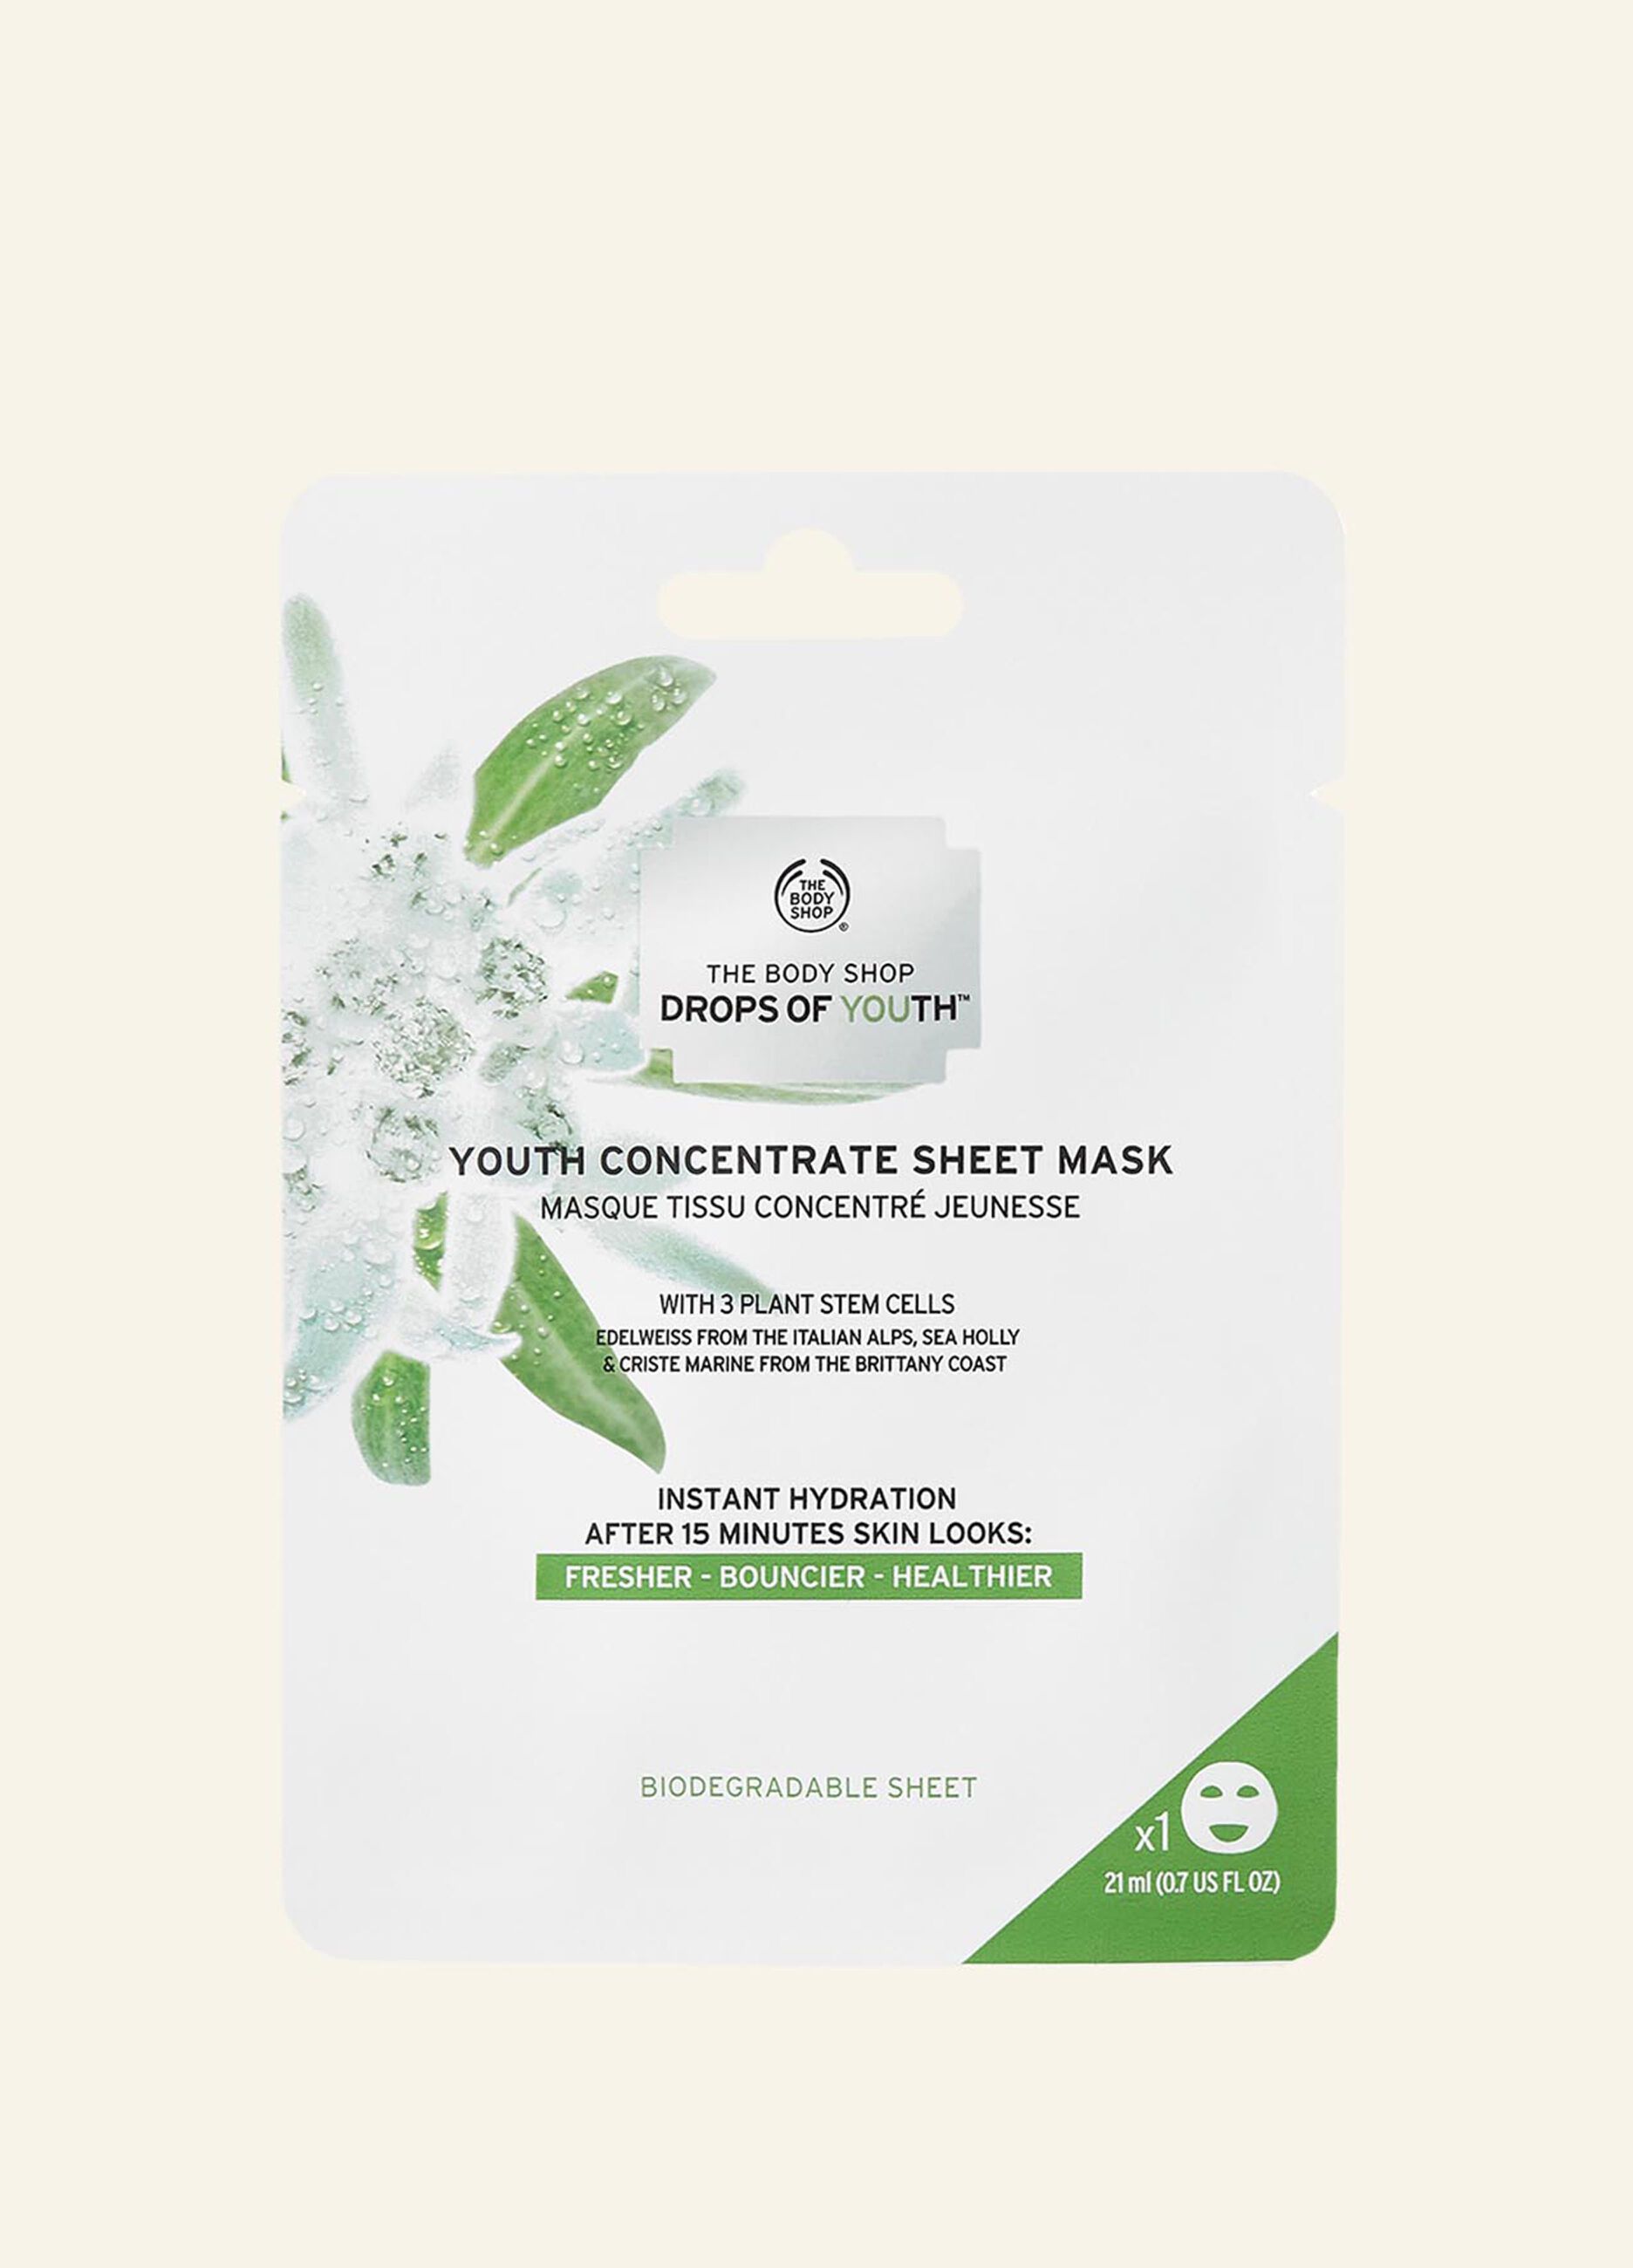 The Body Shop Drops Of Youth™  rejuvenating fabric mask